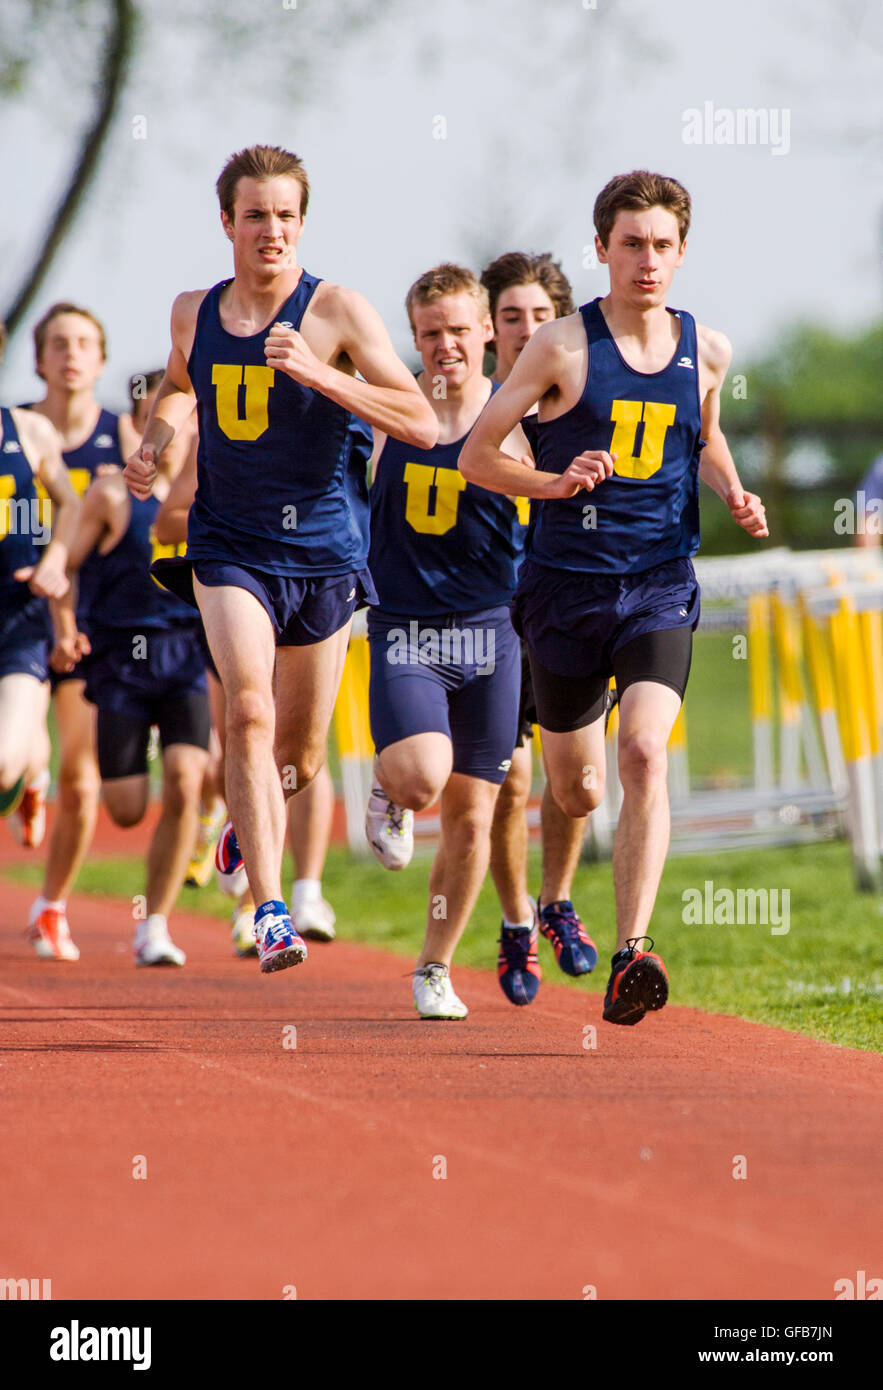 Runners compete on the track during a high school track & field meet. Stock Photo